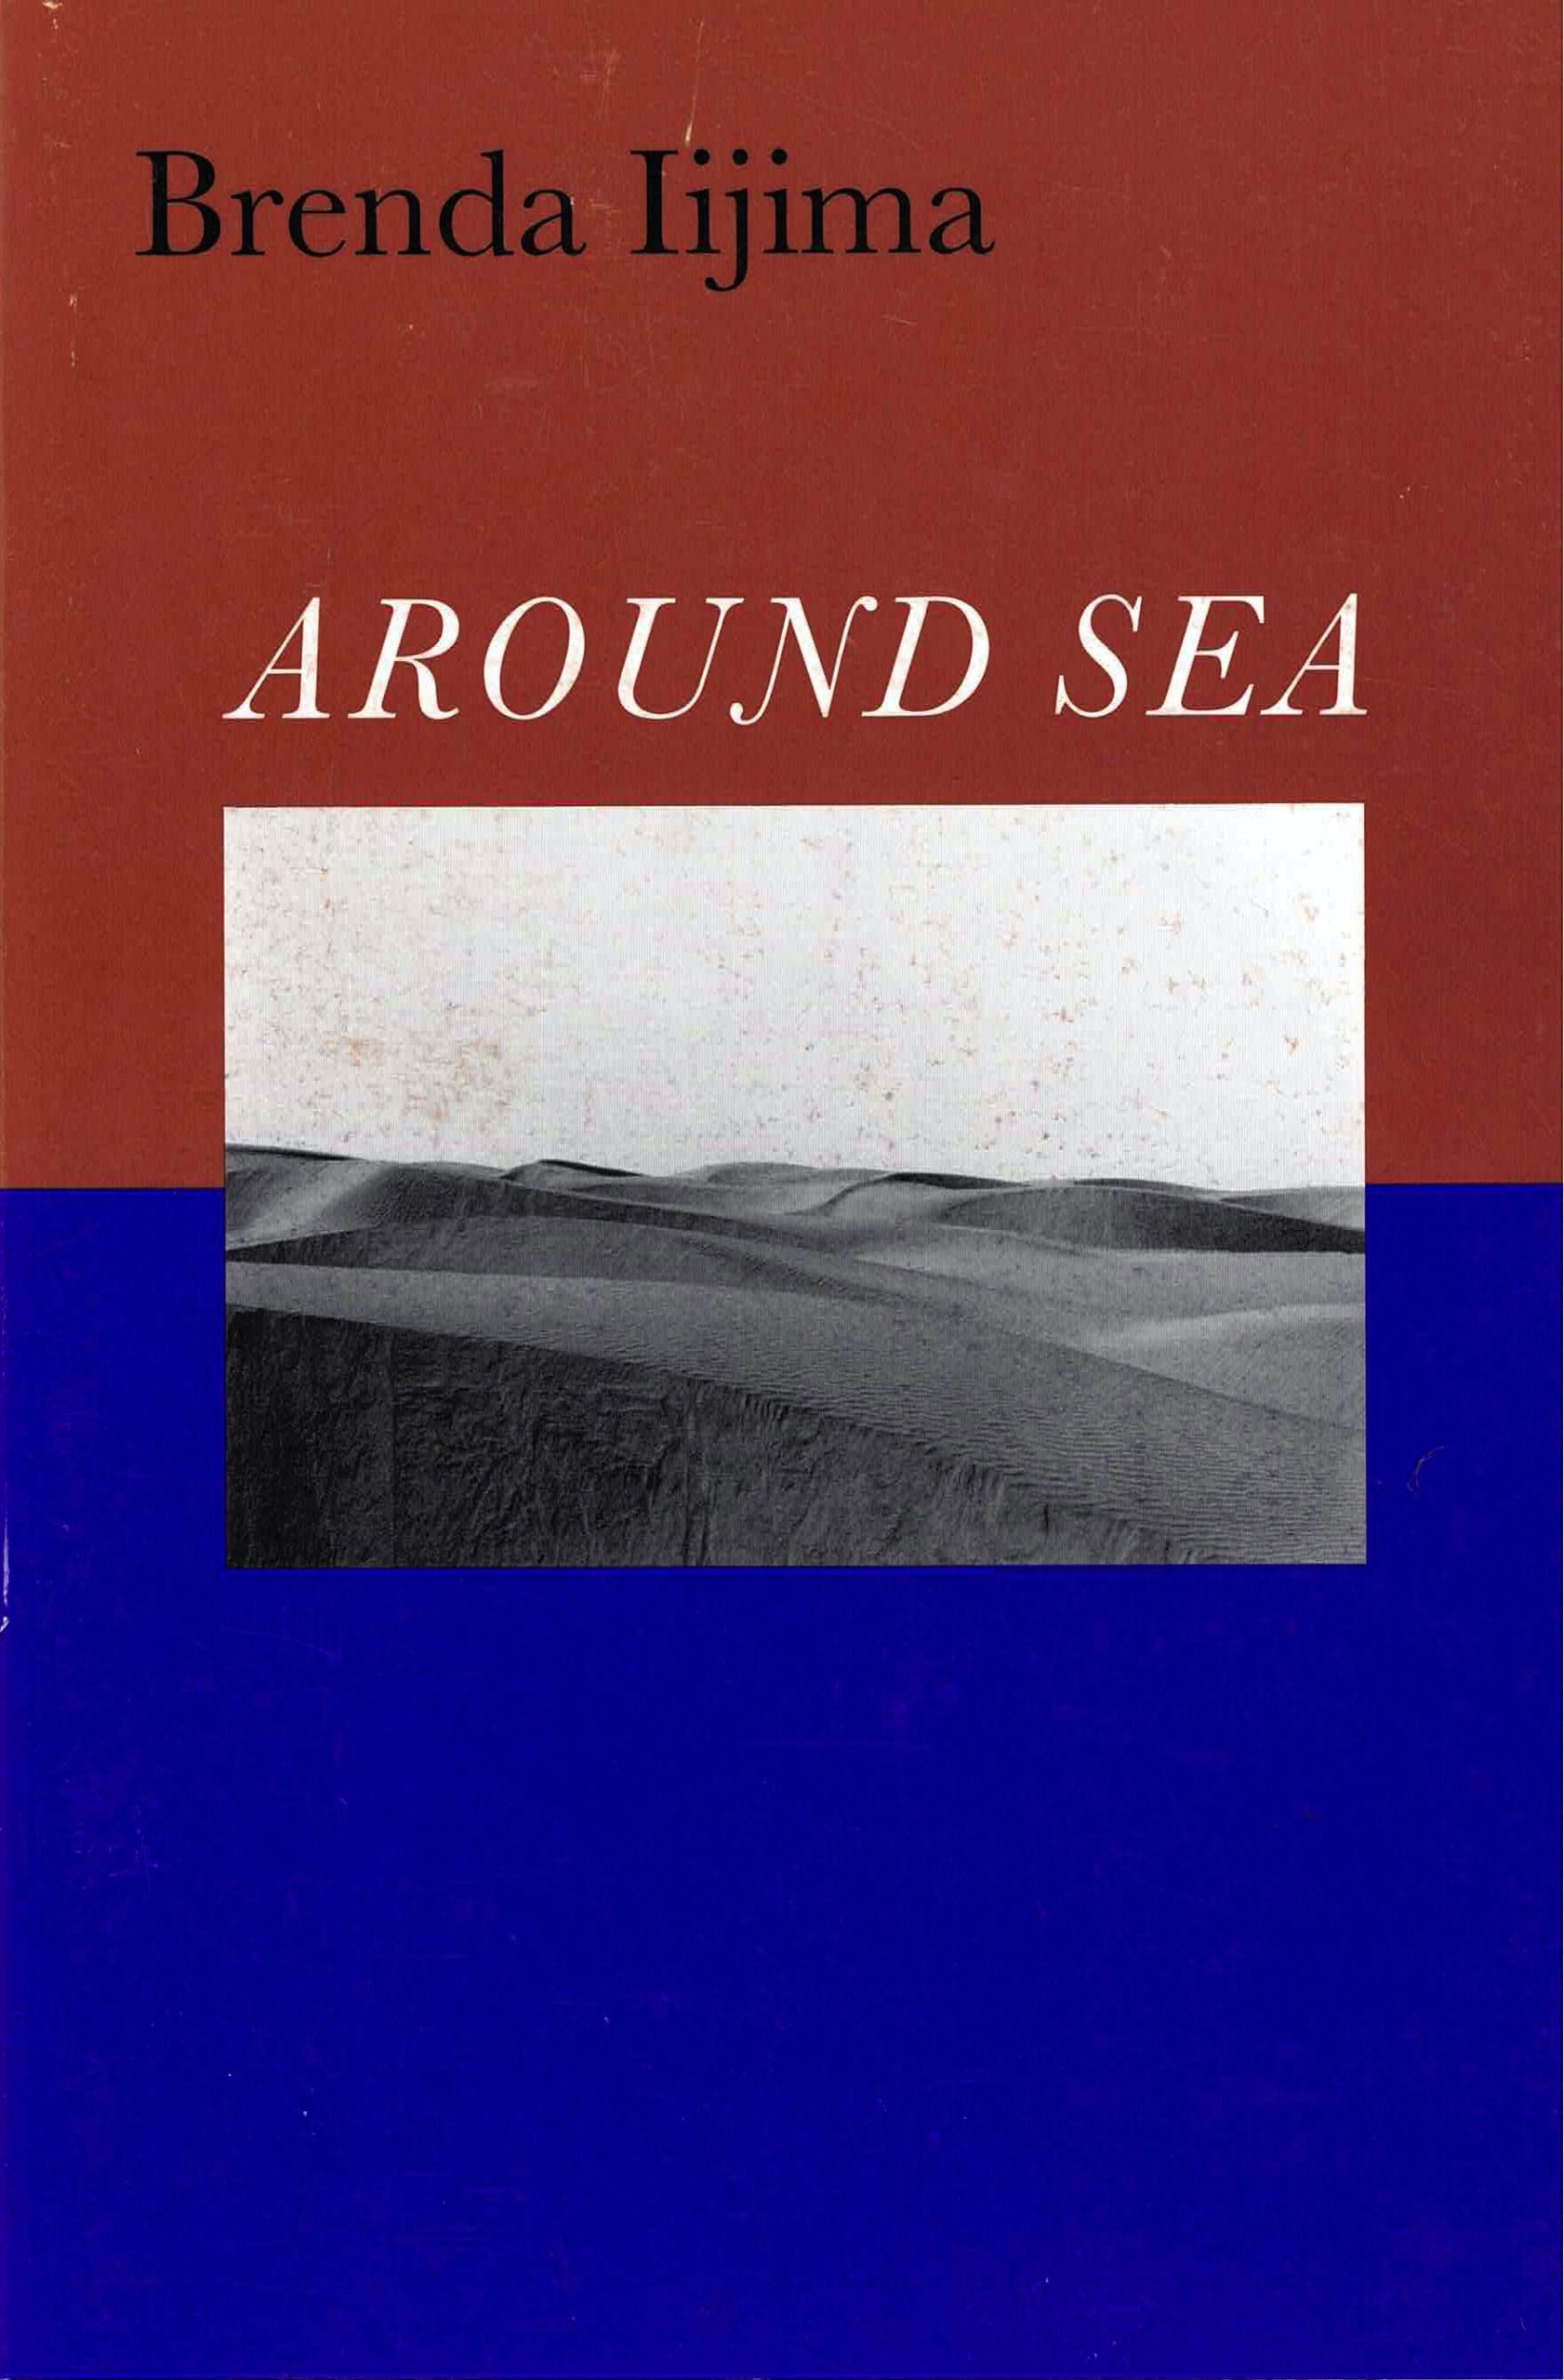 cover of Around Sea by brenda ijima; b&w rectangular photo of sandy dunes at center, top hald of background is brownish red, bottom half is bright blue, title is large white typed text centered above photo, author name is black typed text left-justified at the top